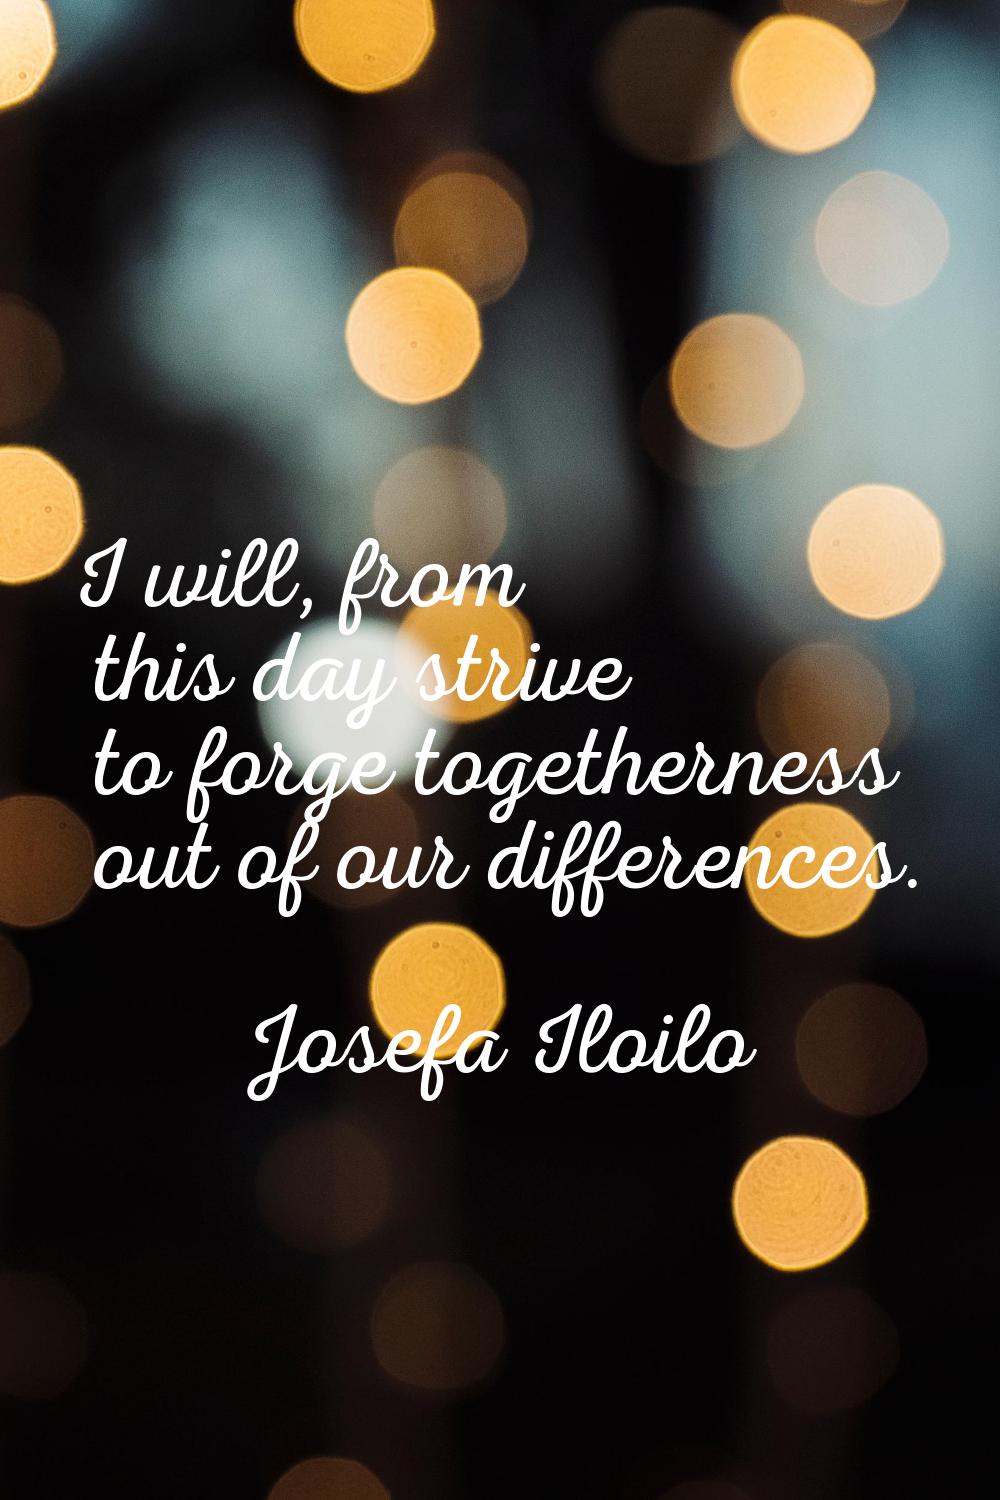 I will, from this day strive to forge togetherness out of our differences.